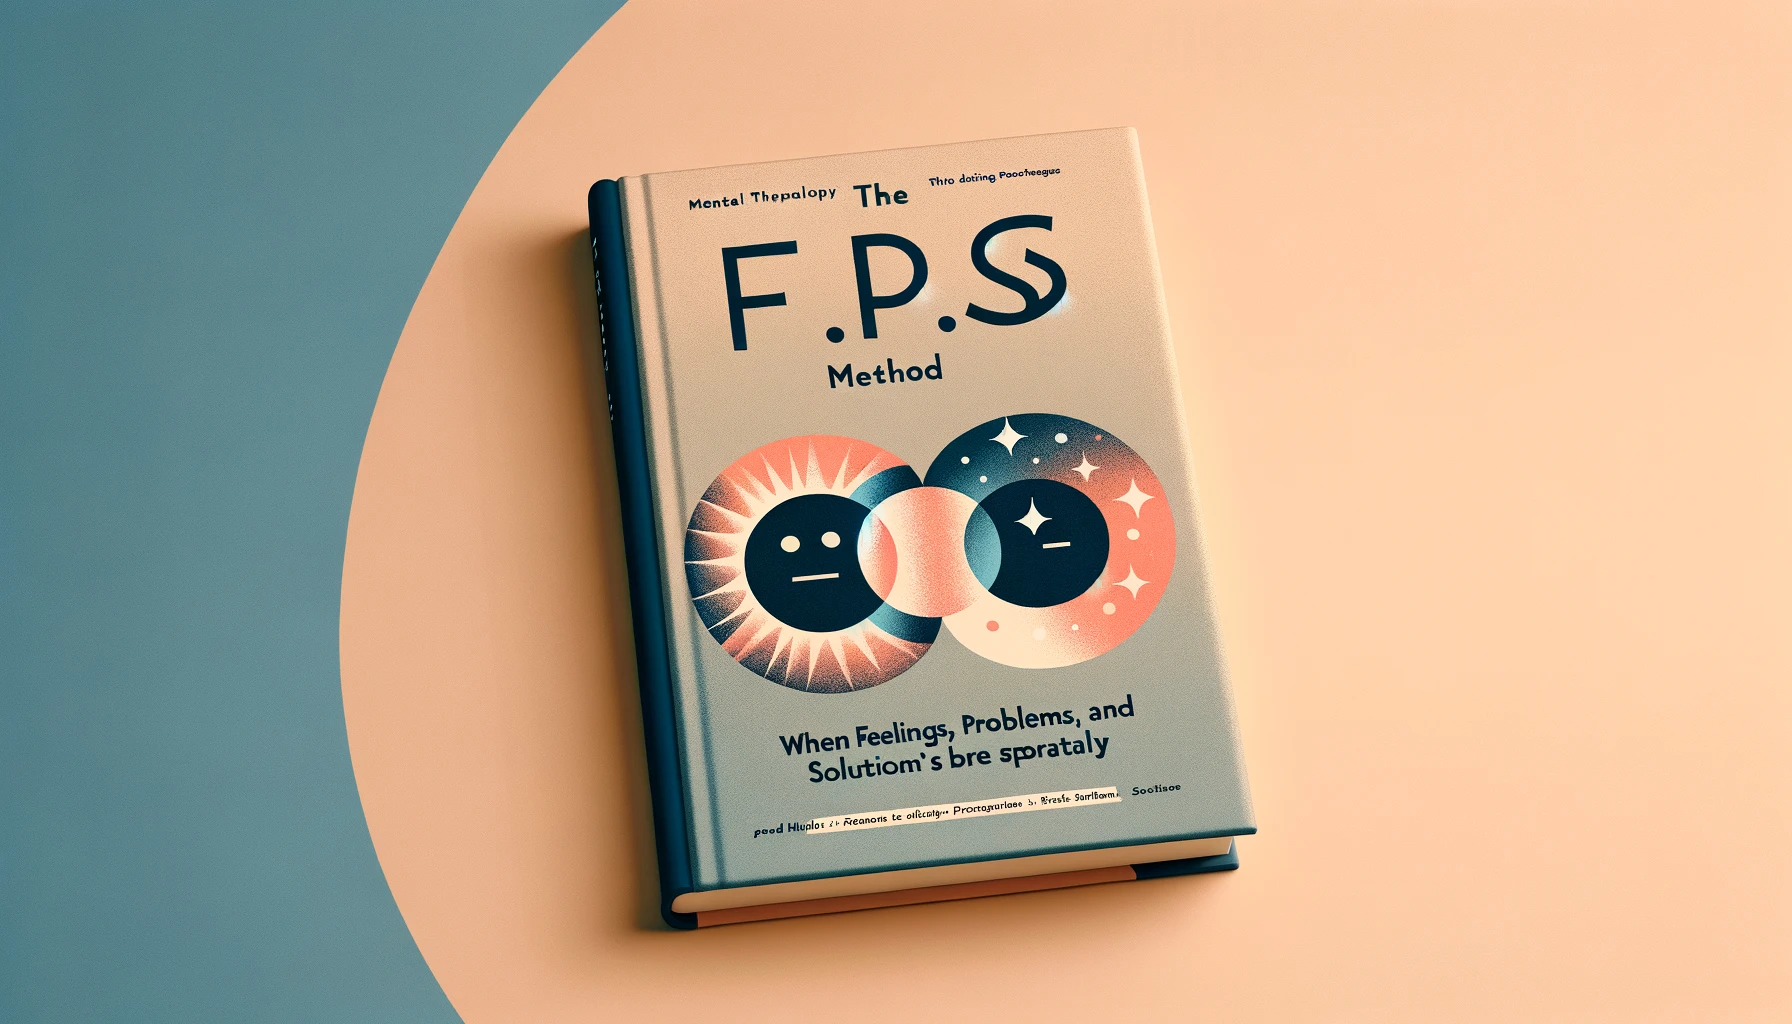 BOOK REVIEW: The F.P.S. Method!: When Feelings, Problems, and Solutions Need to be Explored Separately